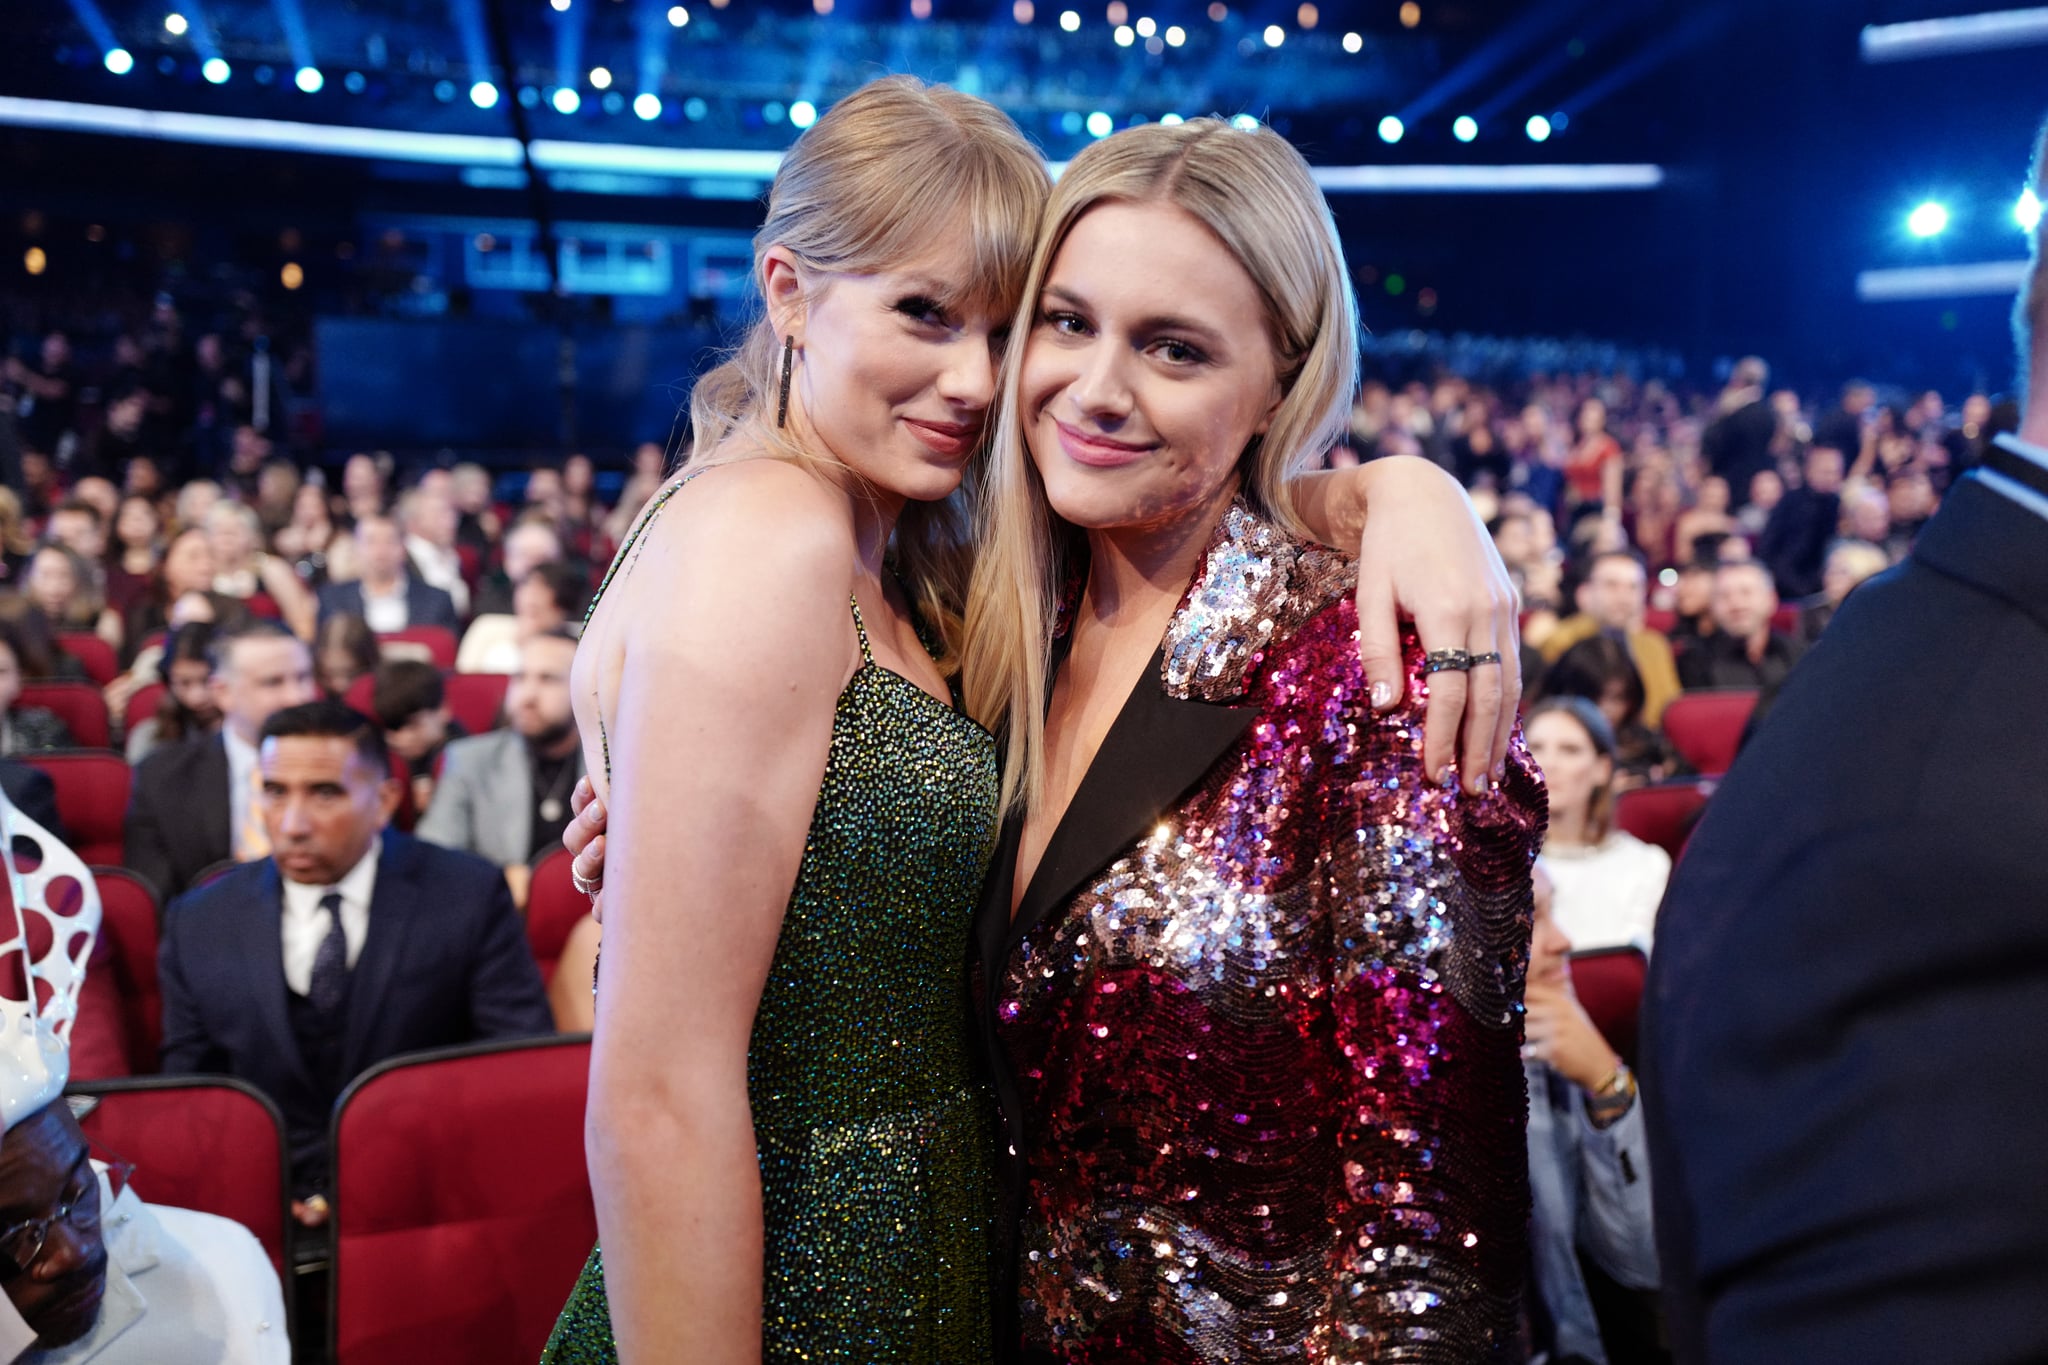 LOS ANGELES, CALIFORNIA - NOVEMBER 24: (LR) Taylor Swift and Kelsea Ballerini attend the 2019 American Music Awards at Microsoft Theater on November 24, 2019 in Los Angeles, California.  (Photo by John Shearer/AMA2019/Getty Images for dcp)